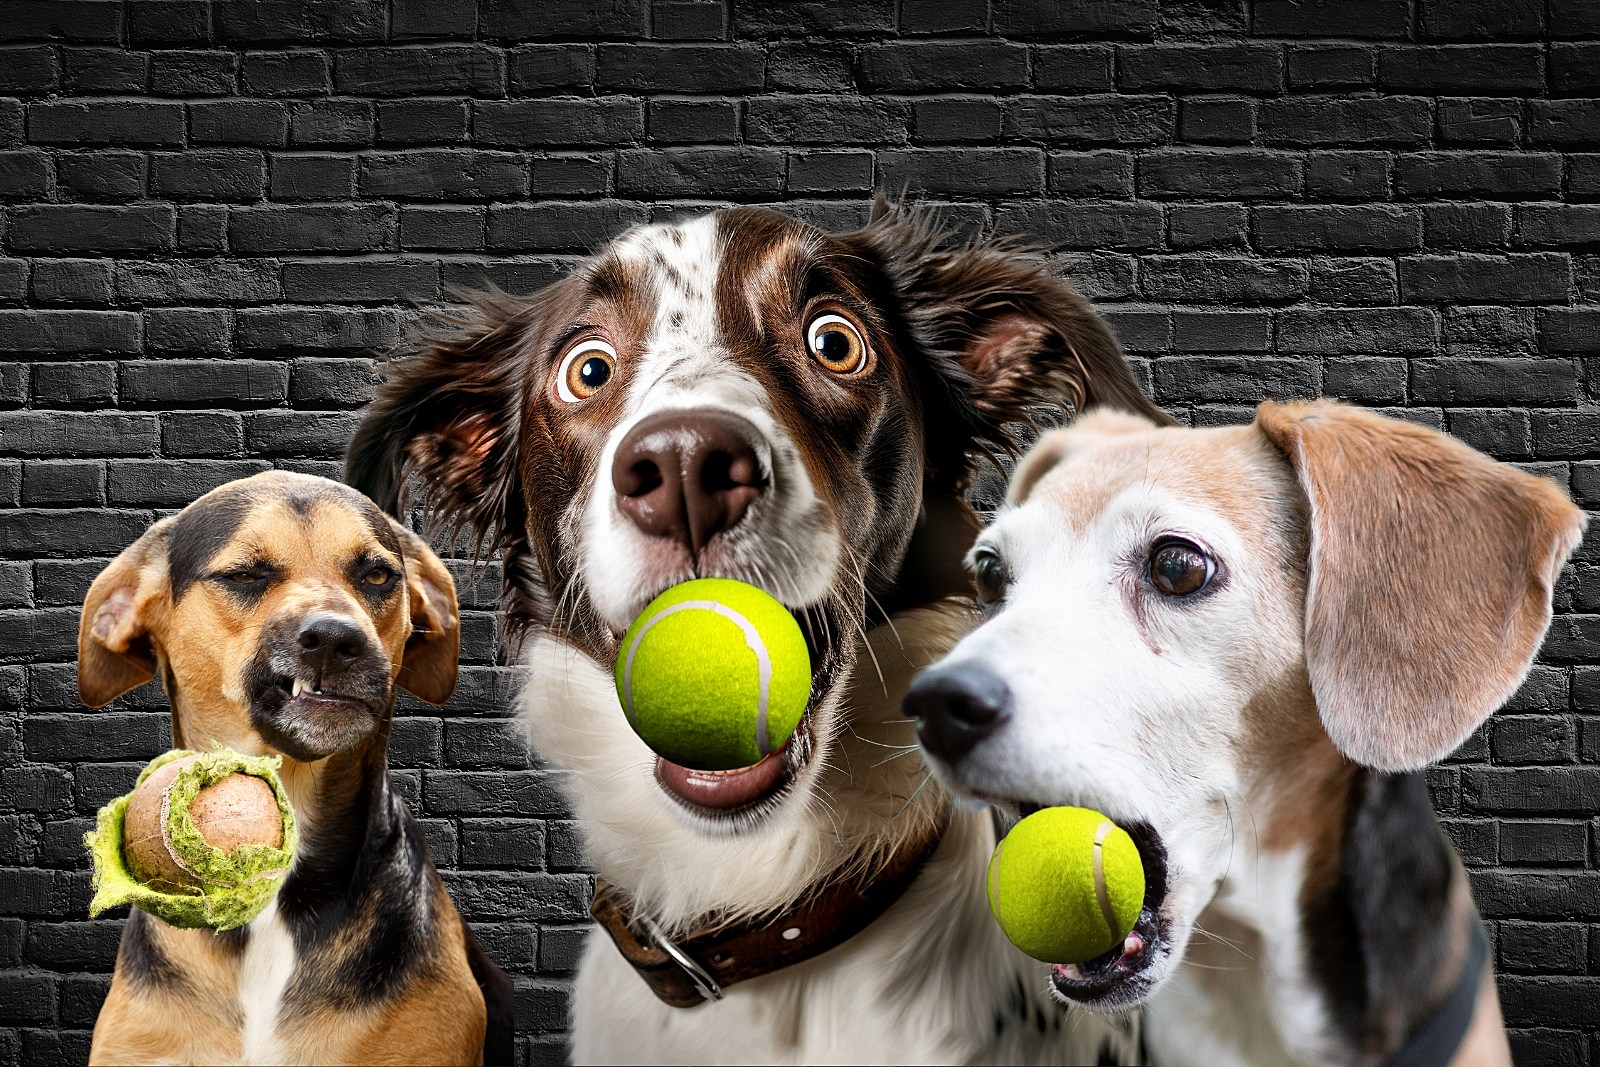 WARNING! Do Not Give Tennis Balls To Your Dog!